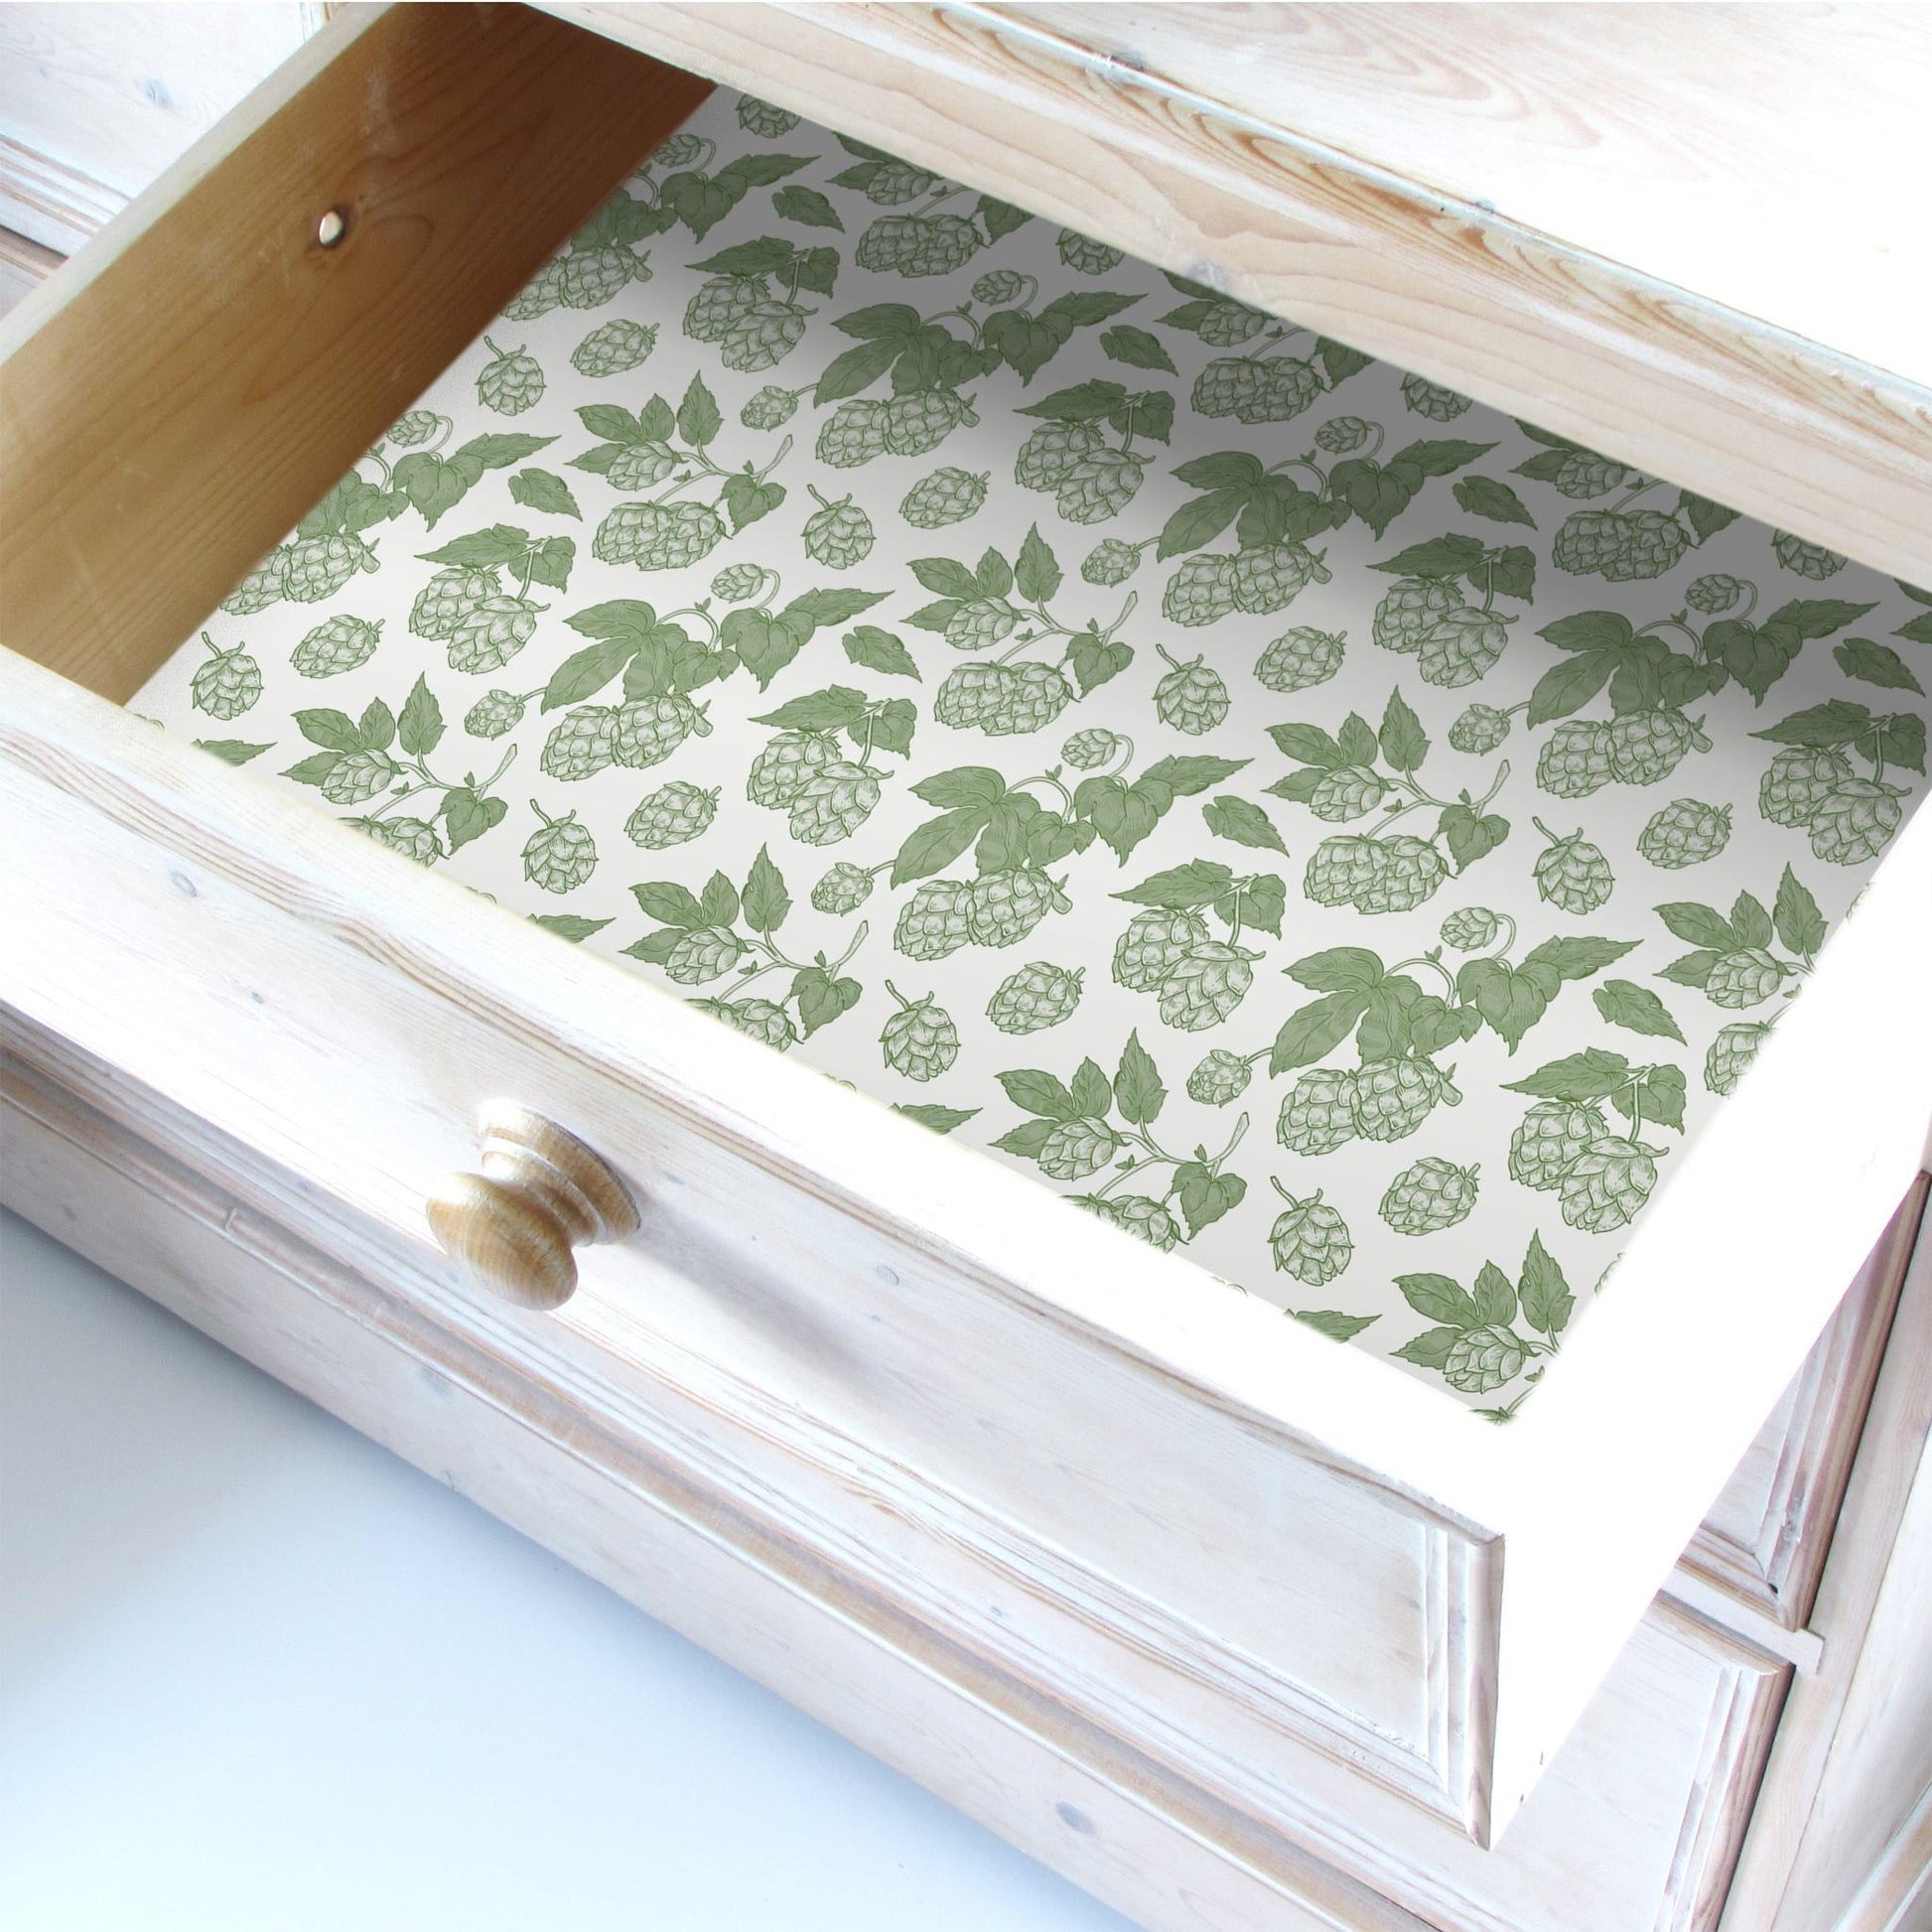 SIMPLY DRAWER LINERS | Wipe Clean & Unscented Drawer Liners with a green HOPS Design.  Perfect for Drawers, Shelves, Cupboards & Cabinets.